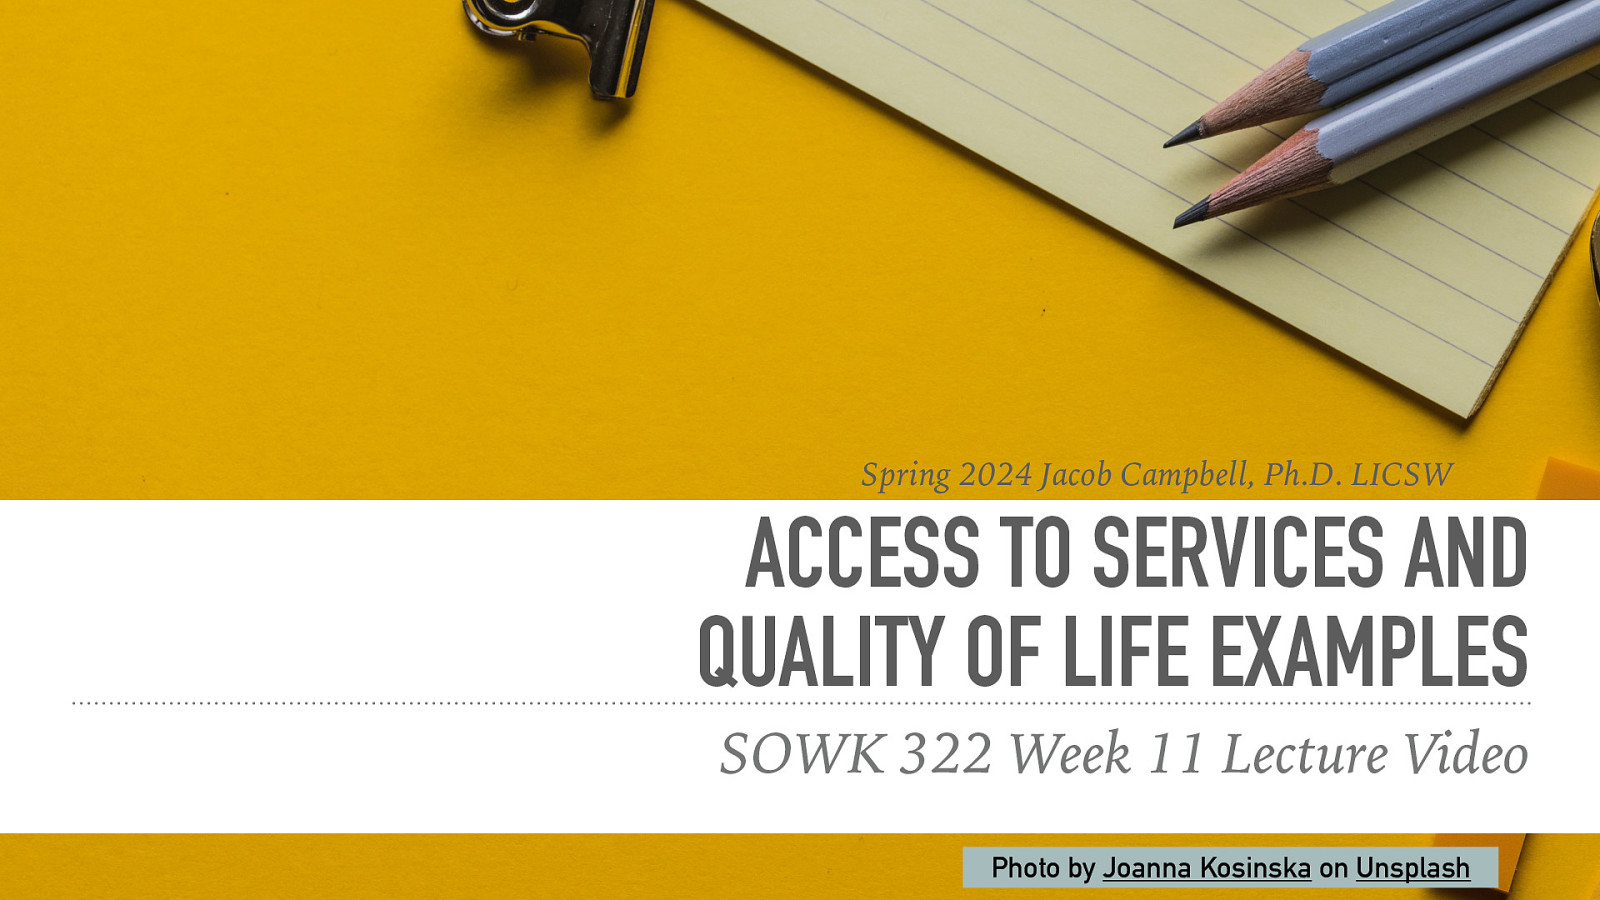 Spring 2024 SOWK 322 Week 11: Access to Benefits and Quality of Life Examples